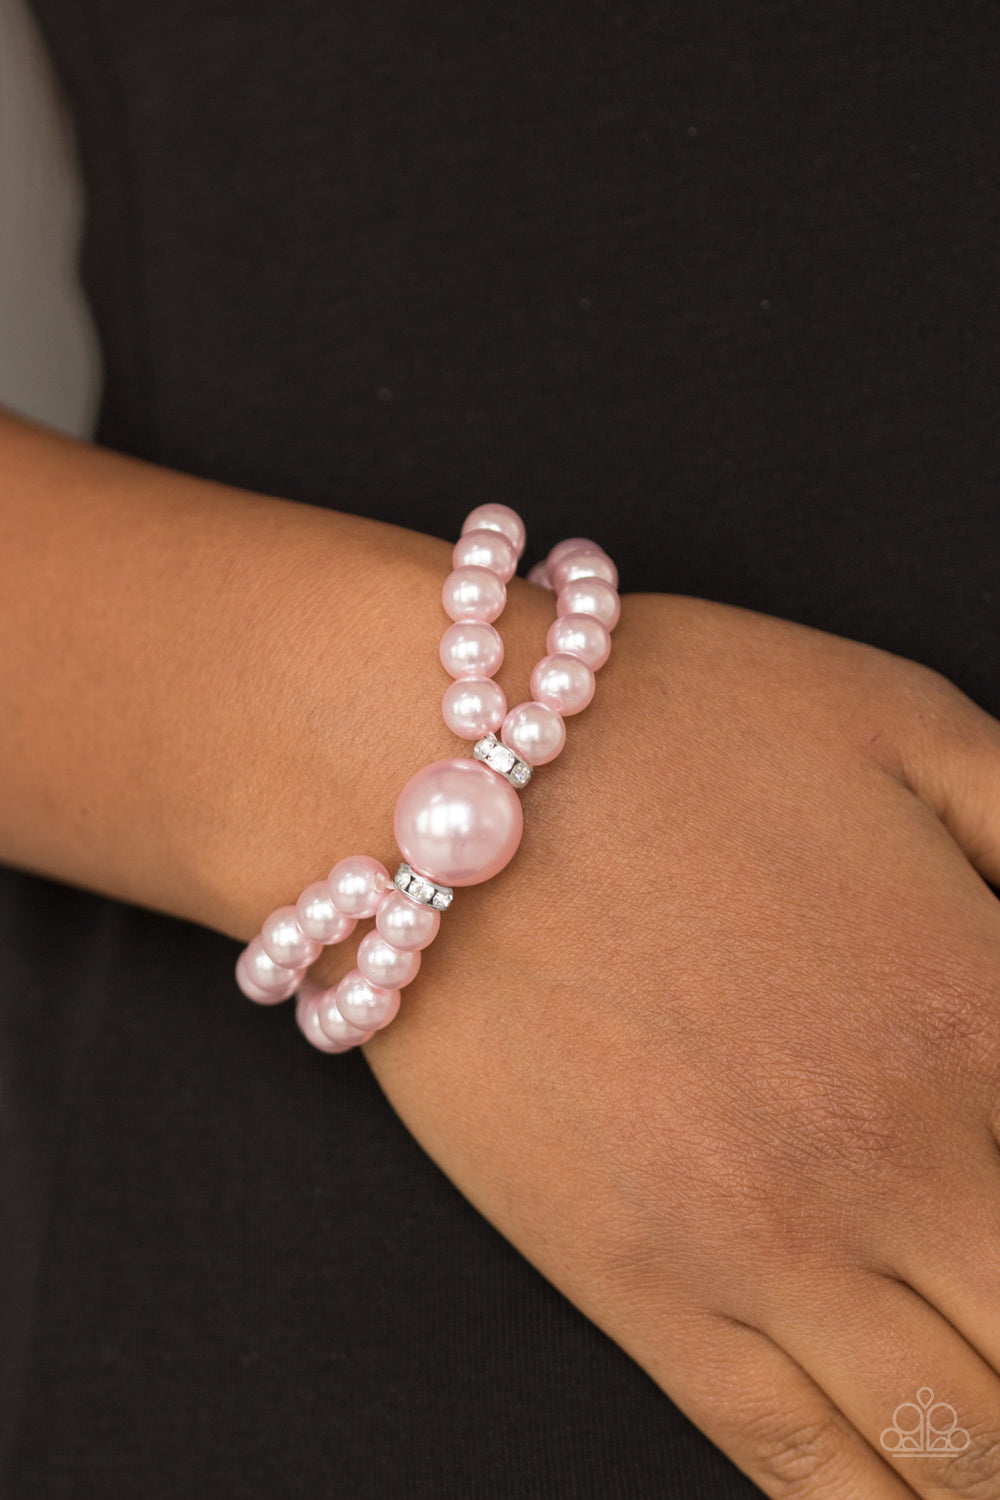 Paparazzi Romantic Redux - Pink Pearls - White Rhinestones - Stretchy Bracelet - Life of the Party Exclusive October 2018 - VINTAGE! - $5 Jewelry With Ashley Swint